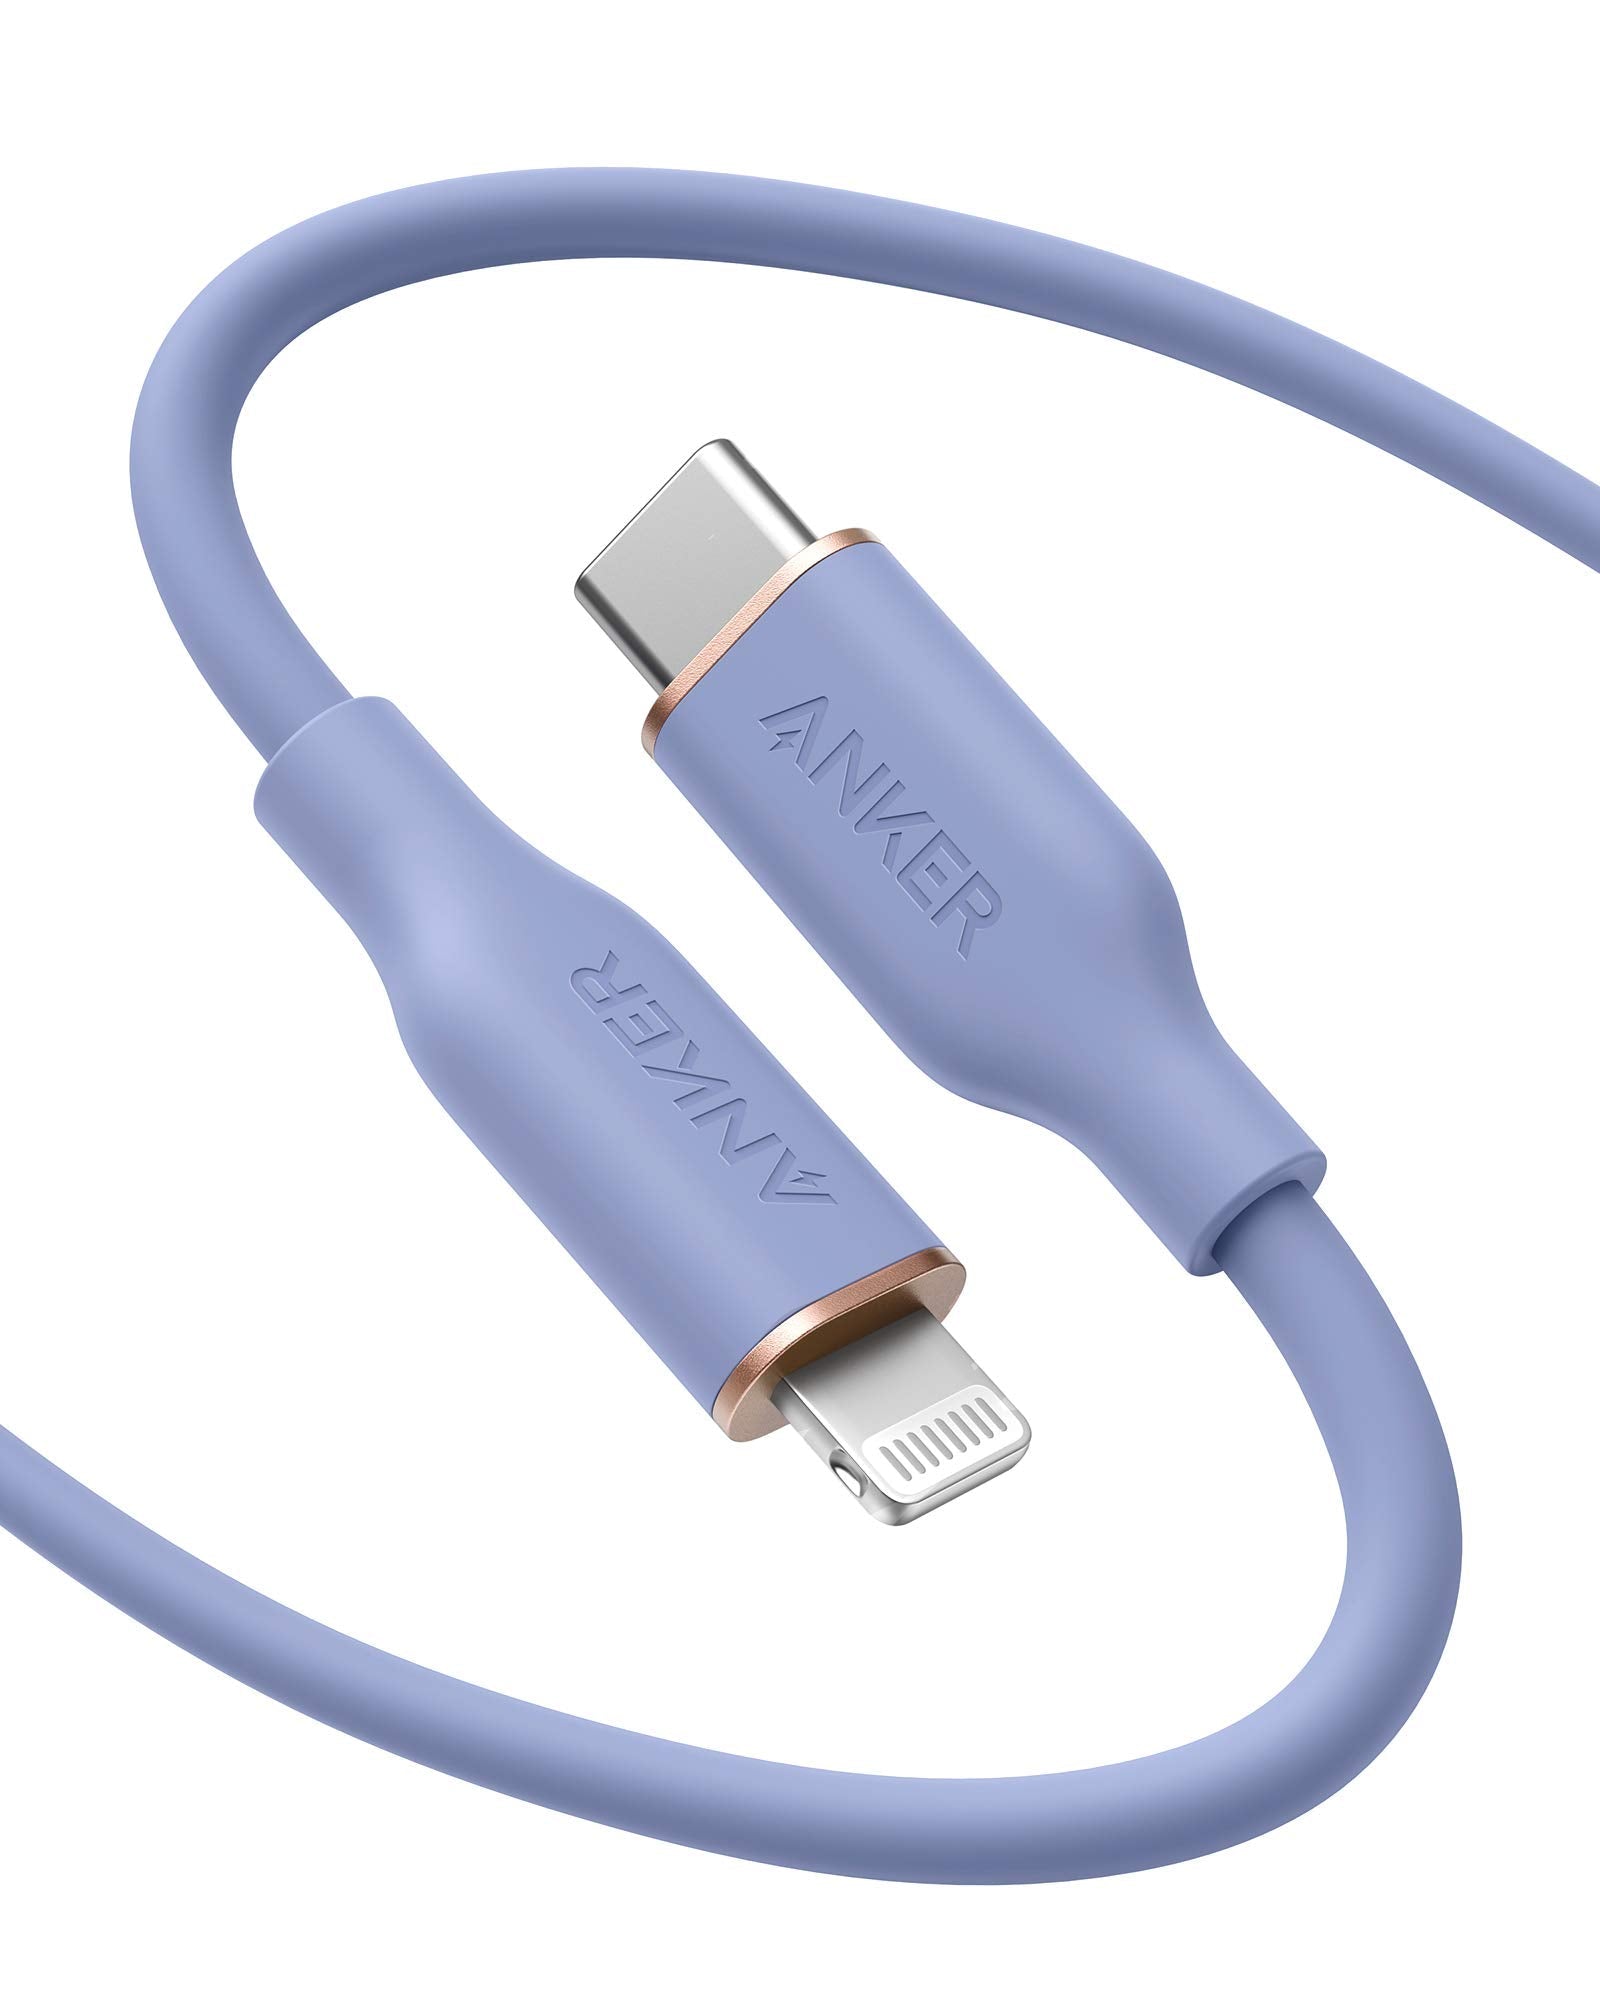 Anker 641 USB-C to Lightning Cable (Flow, Silicone) 6ft / Lavender Grey